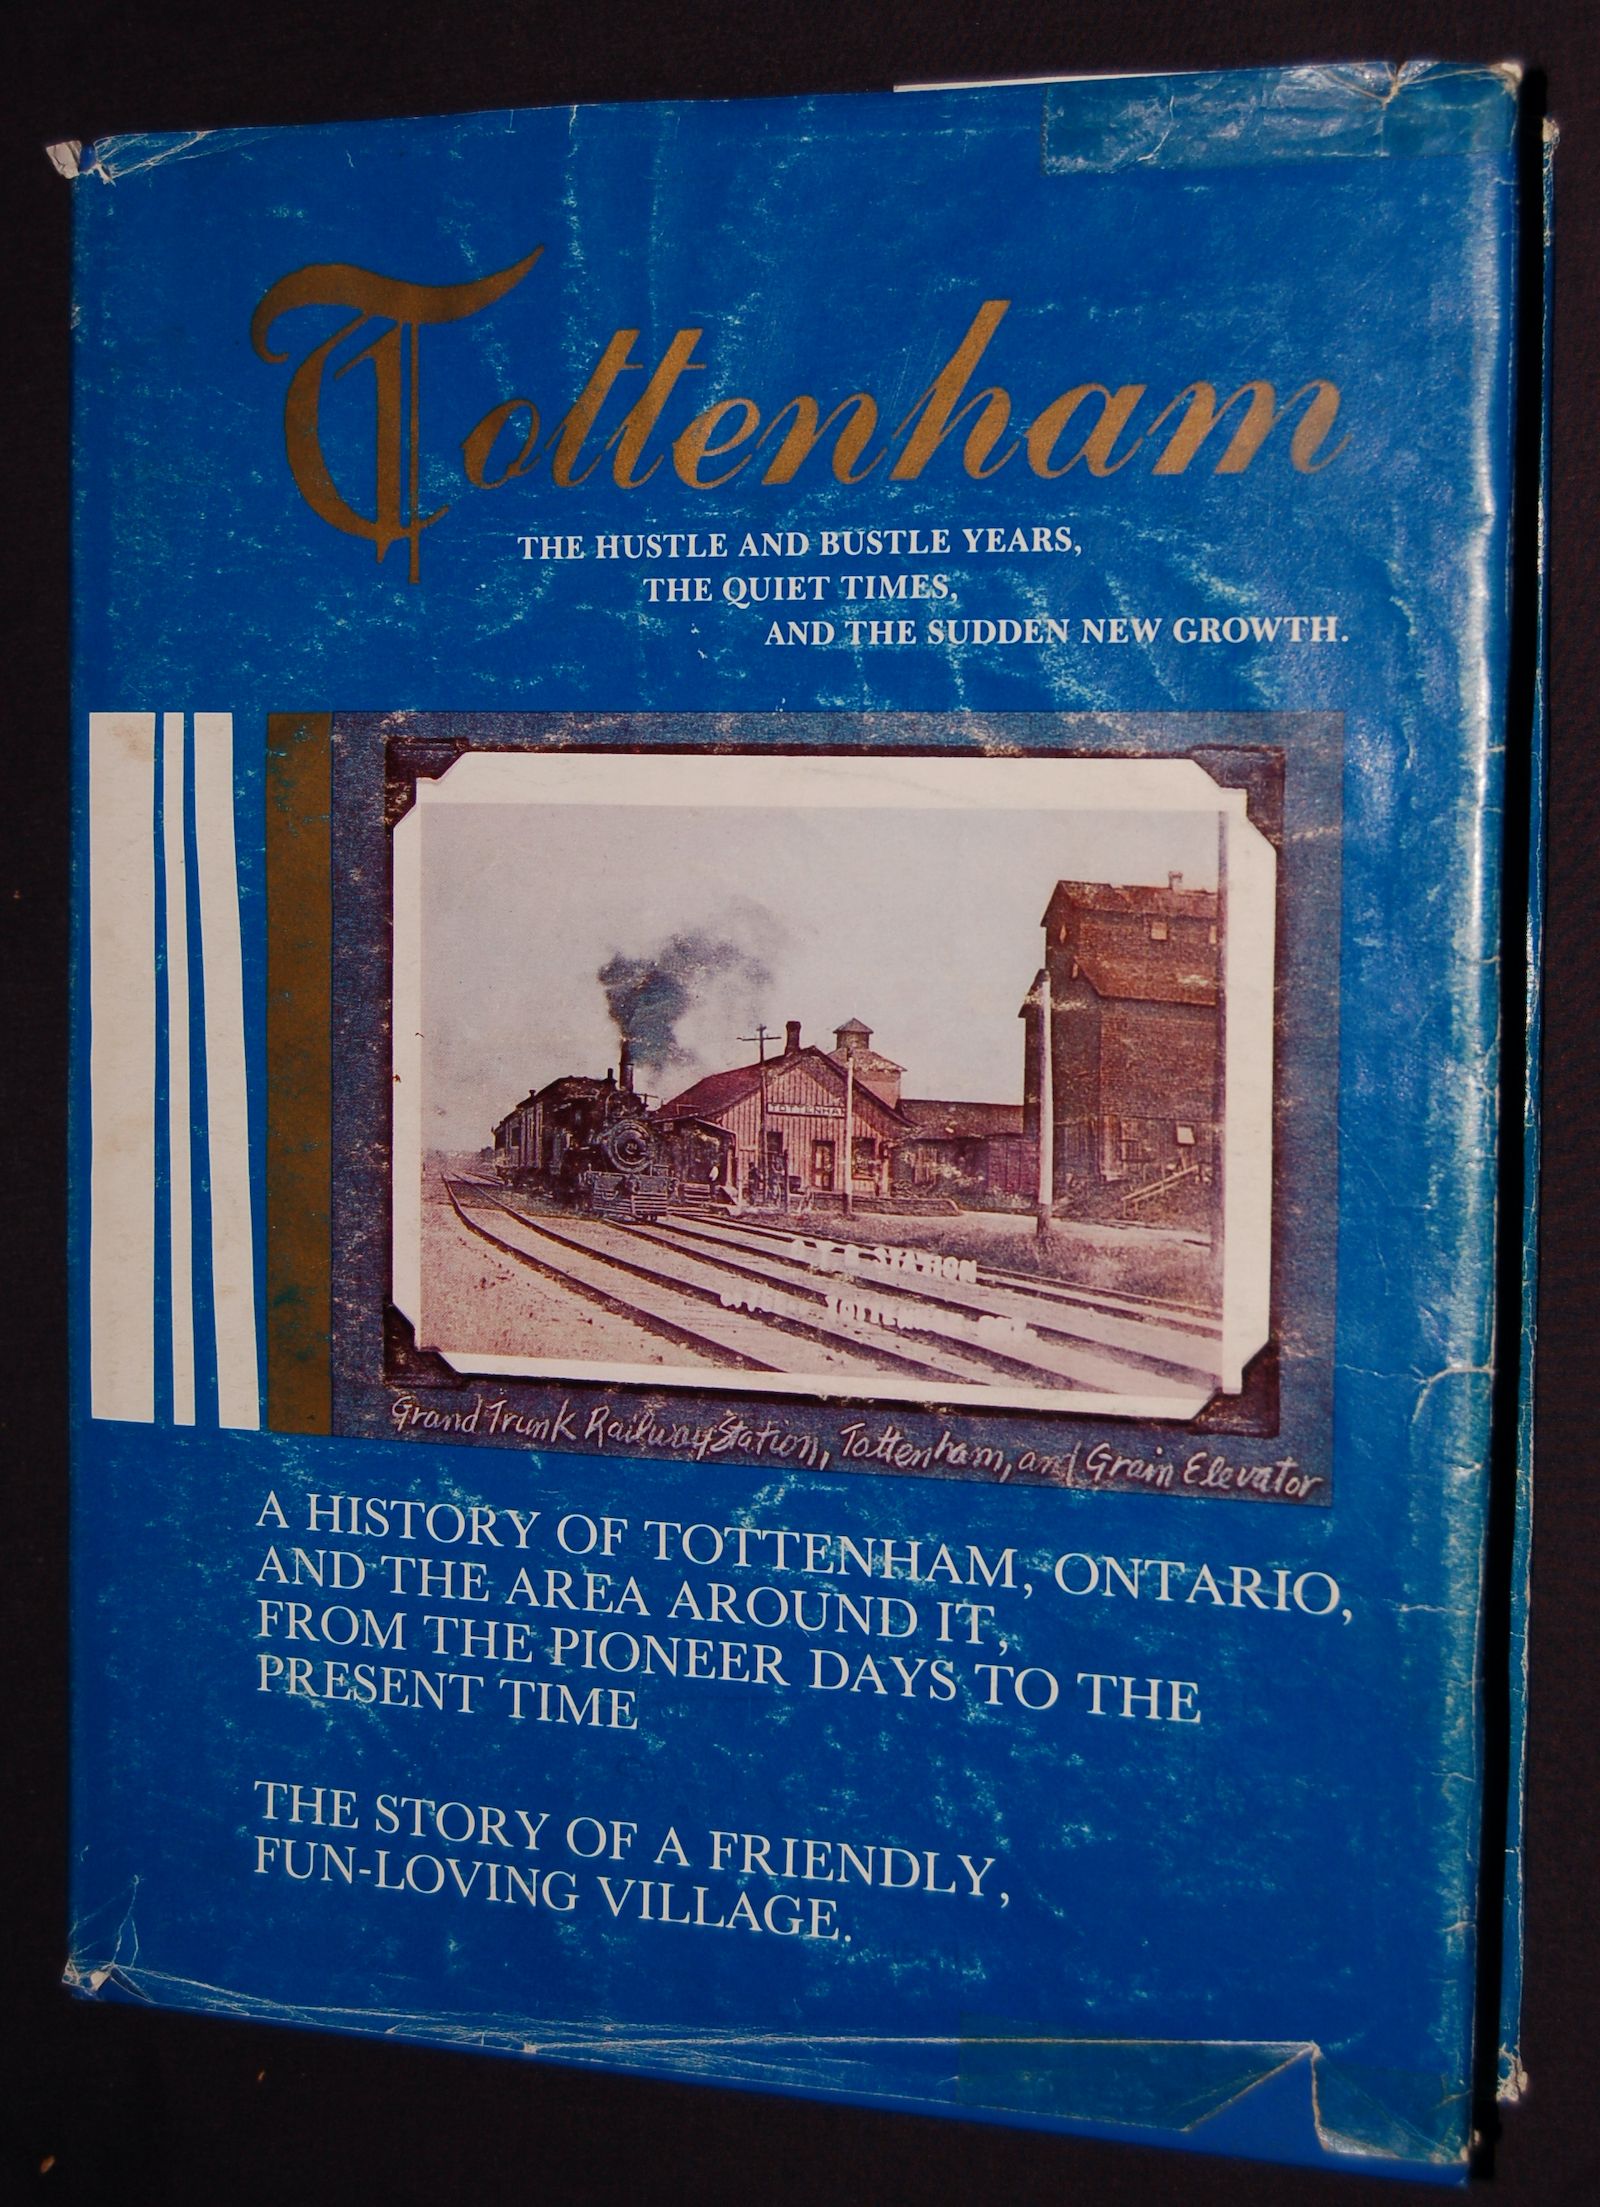 Tottenham. A History of Tottenham, Ontario, and the Area around It, from the Pioneer Days to the Present Time, the Story of a Friendly, Fun-Loving Village. 